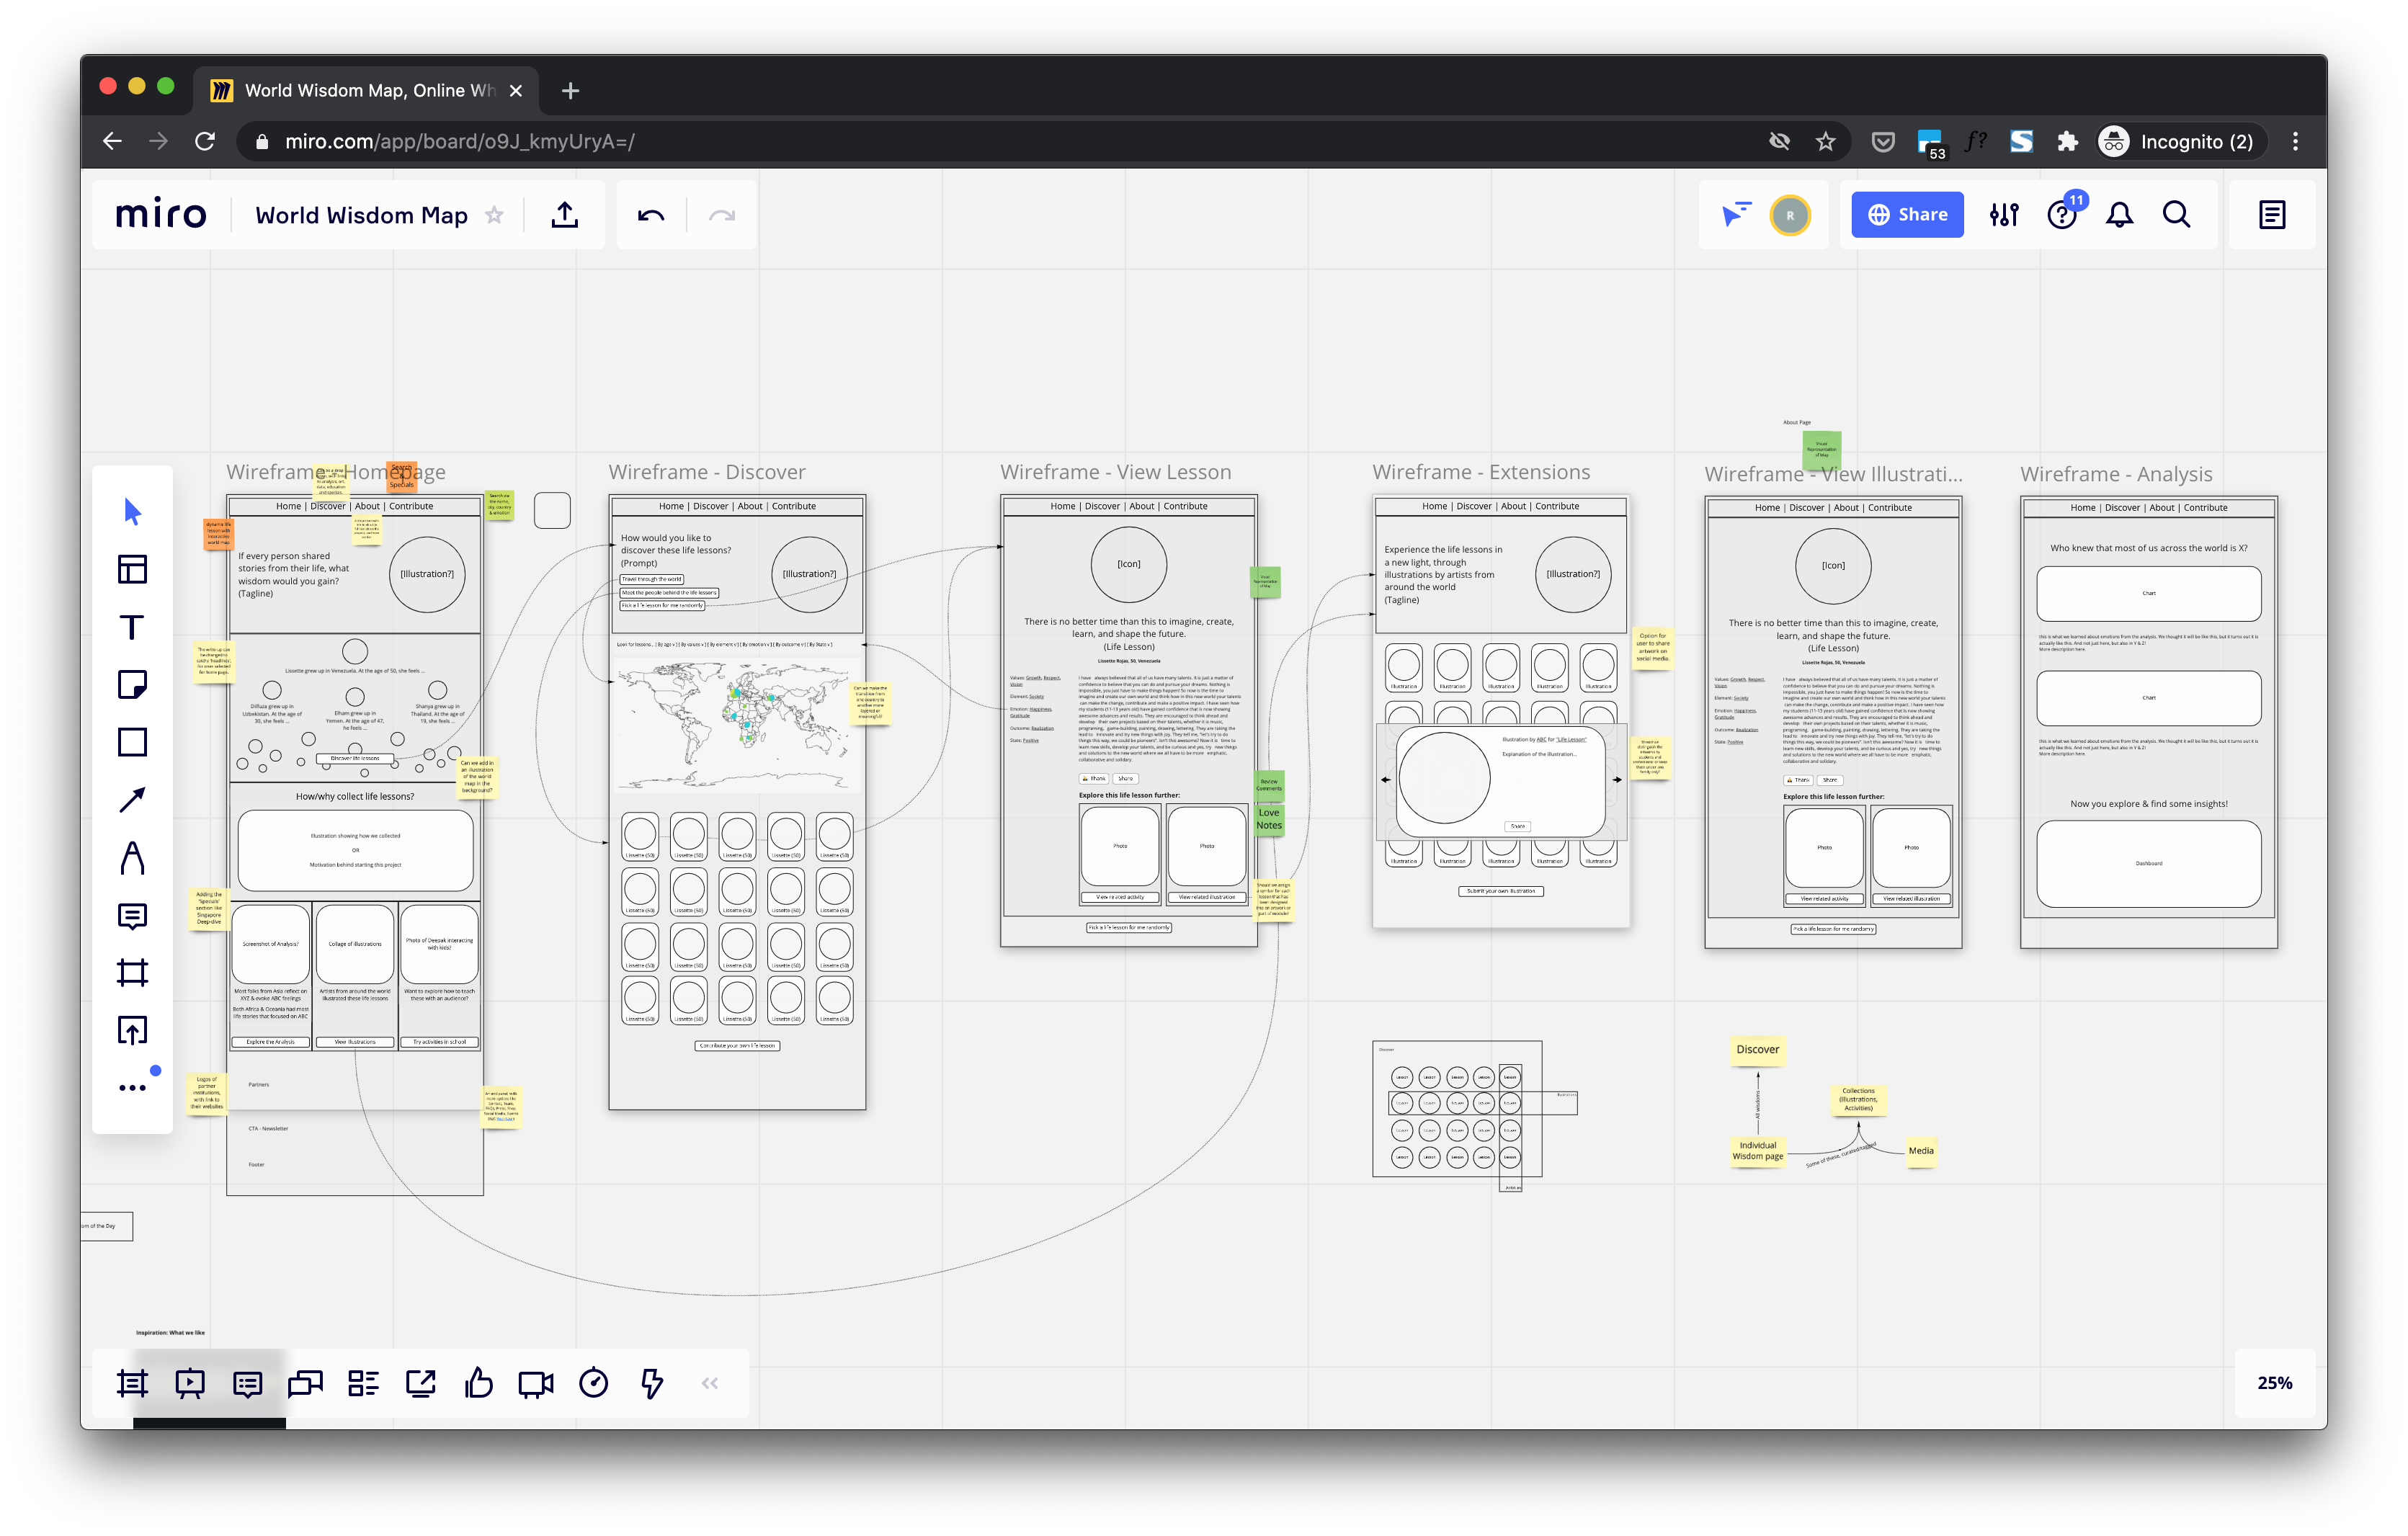 Discussions around wireframes on Miro